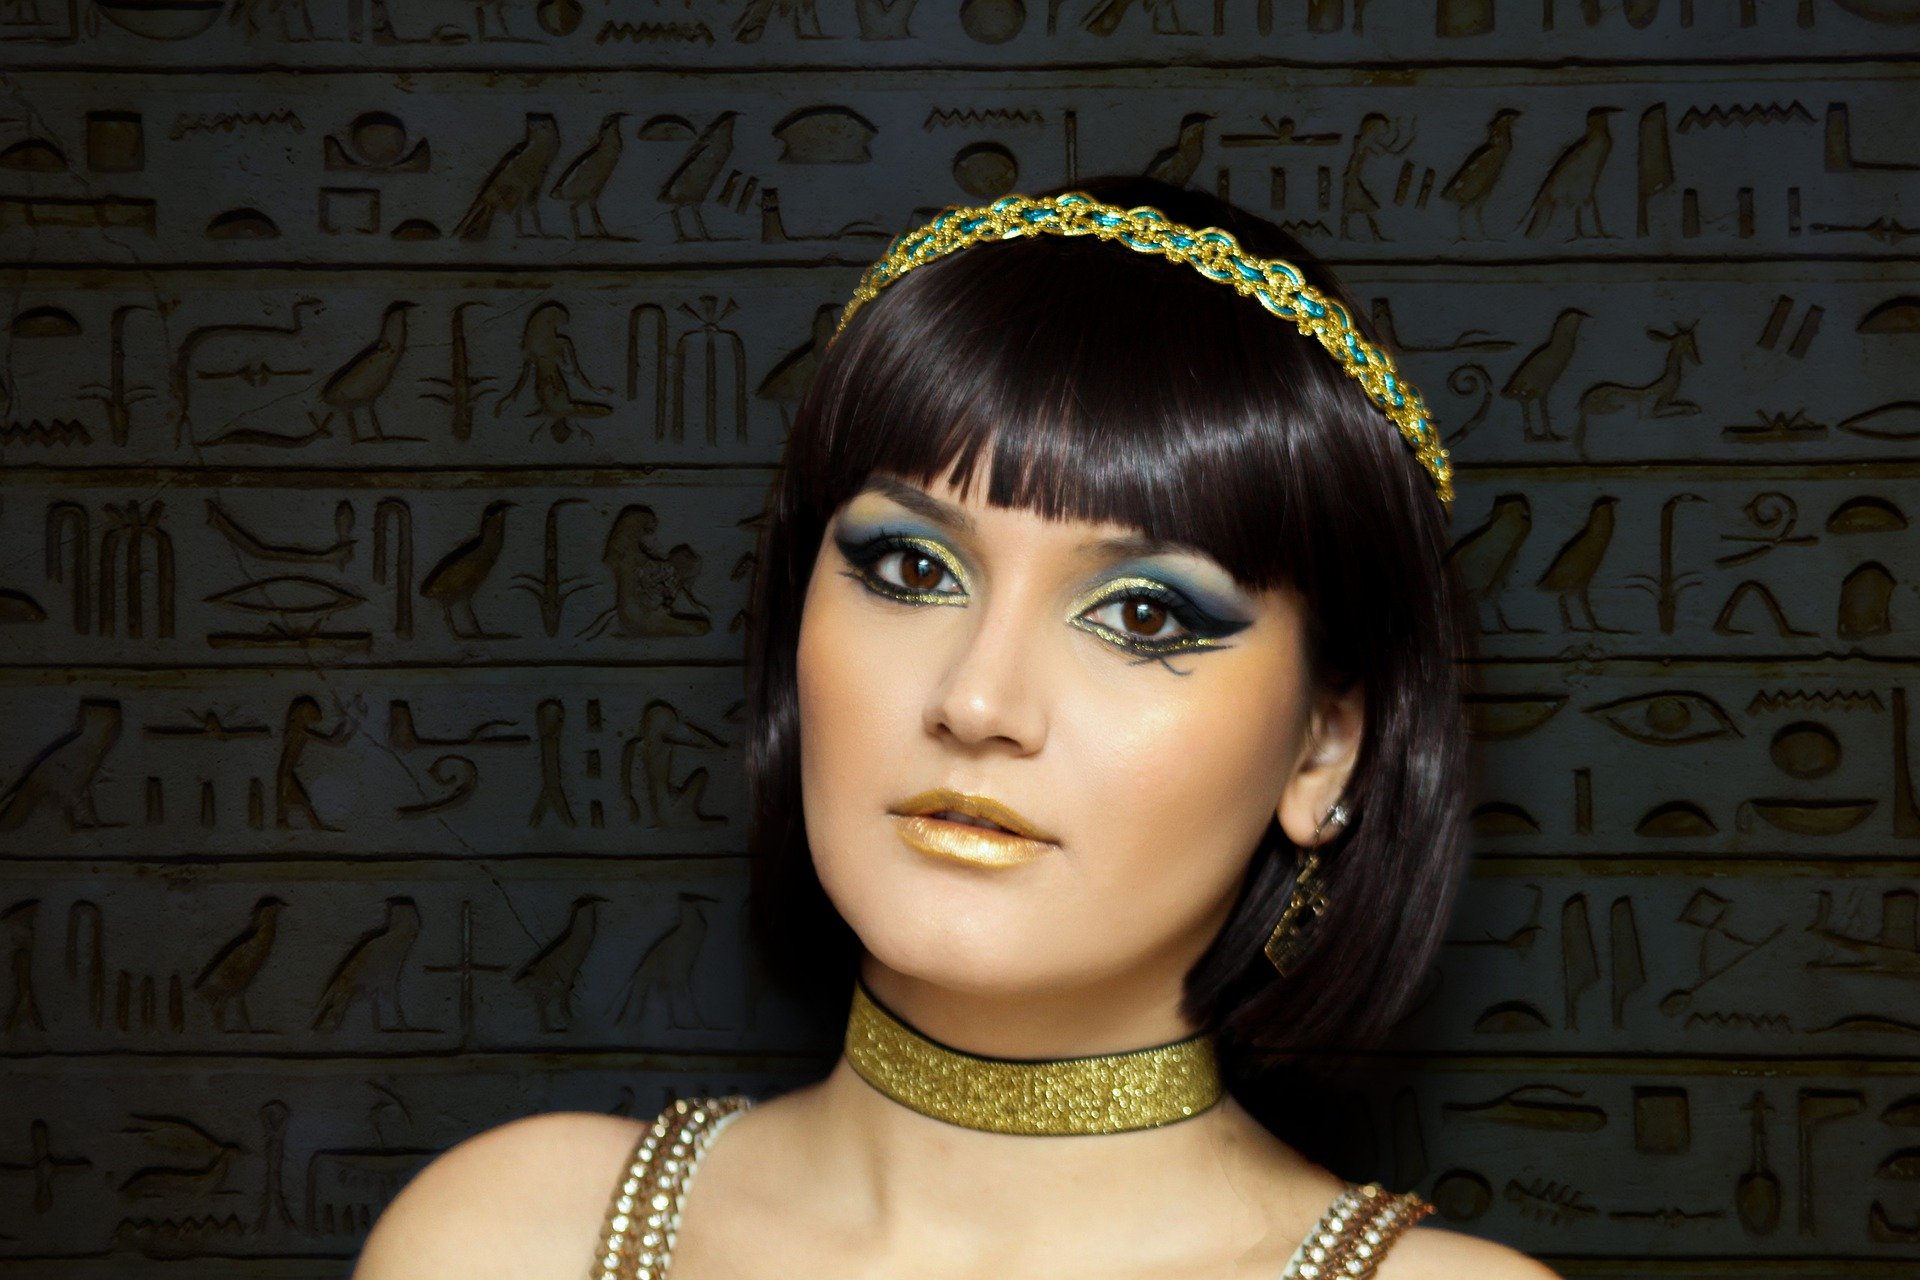 Cleopatra depicted as a young woman